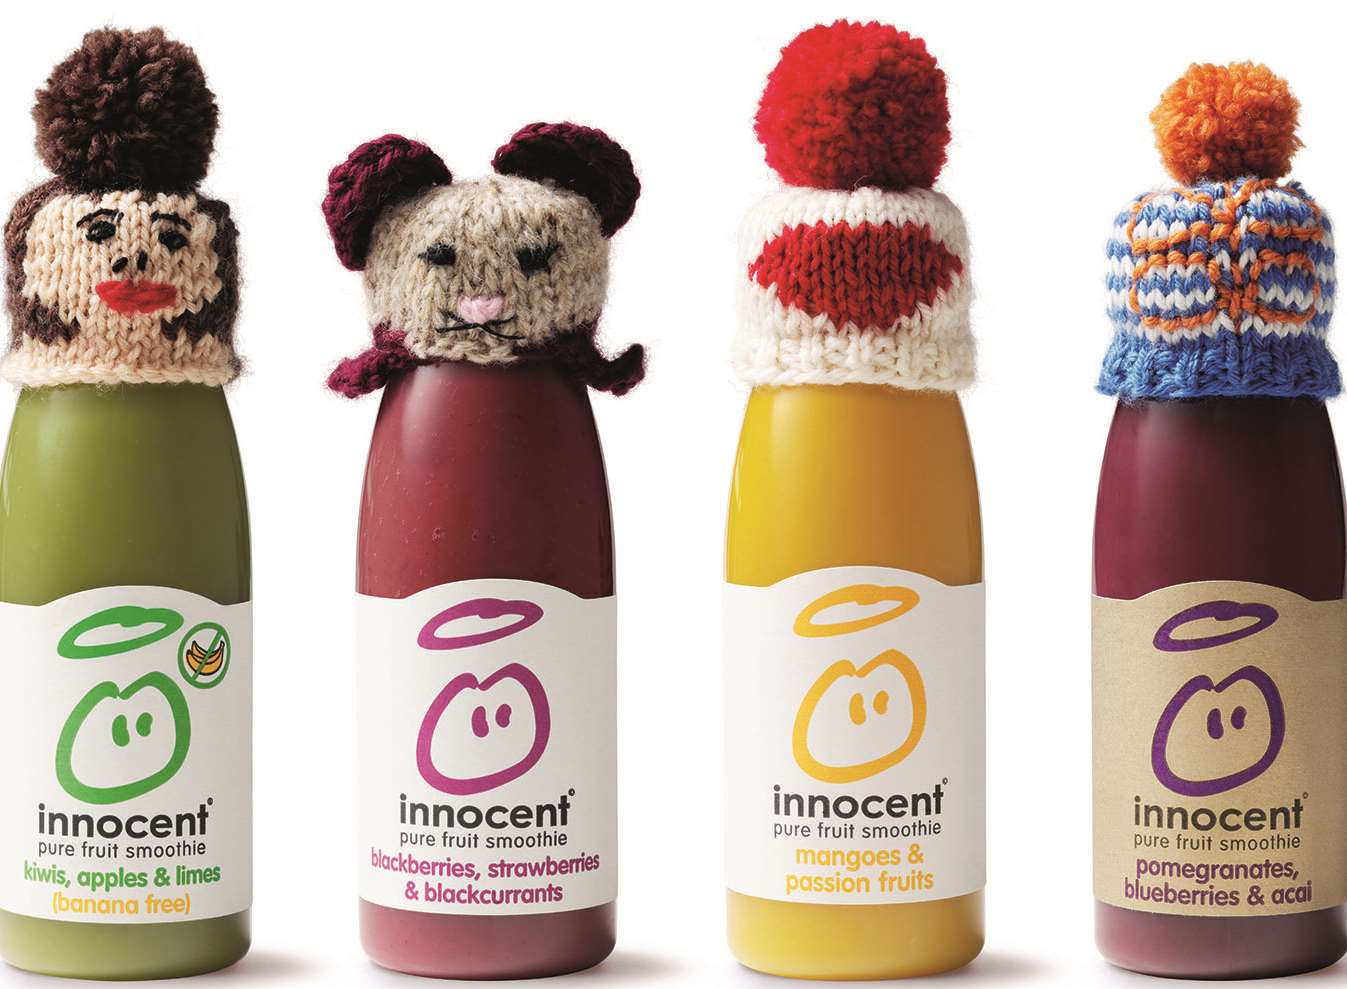 The smoothie bottles wearing woolly hats, made for The Big Knit